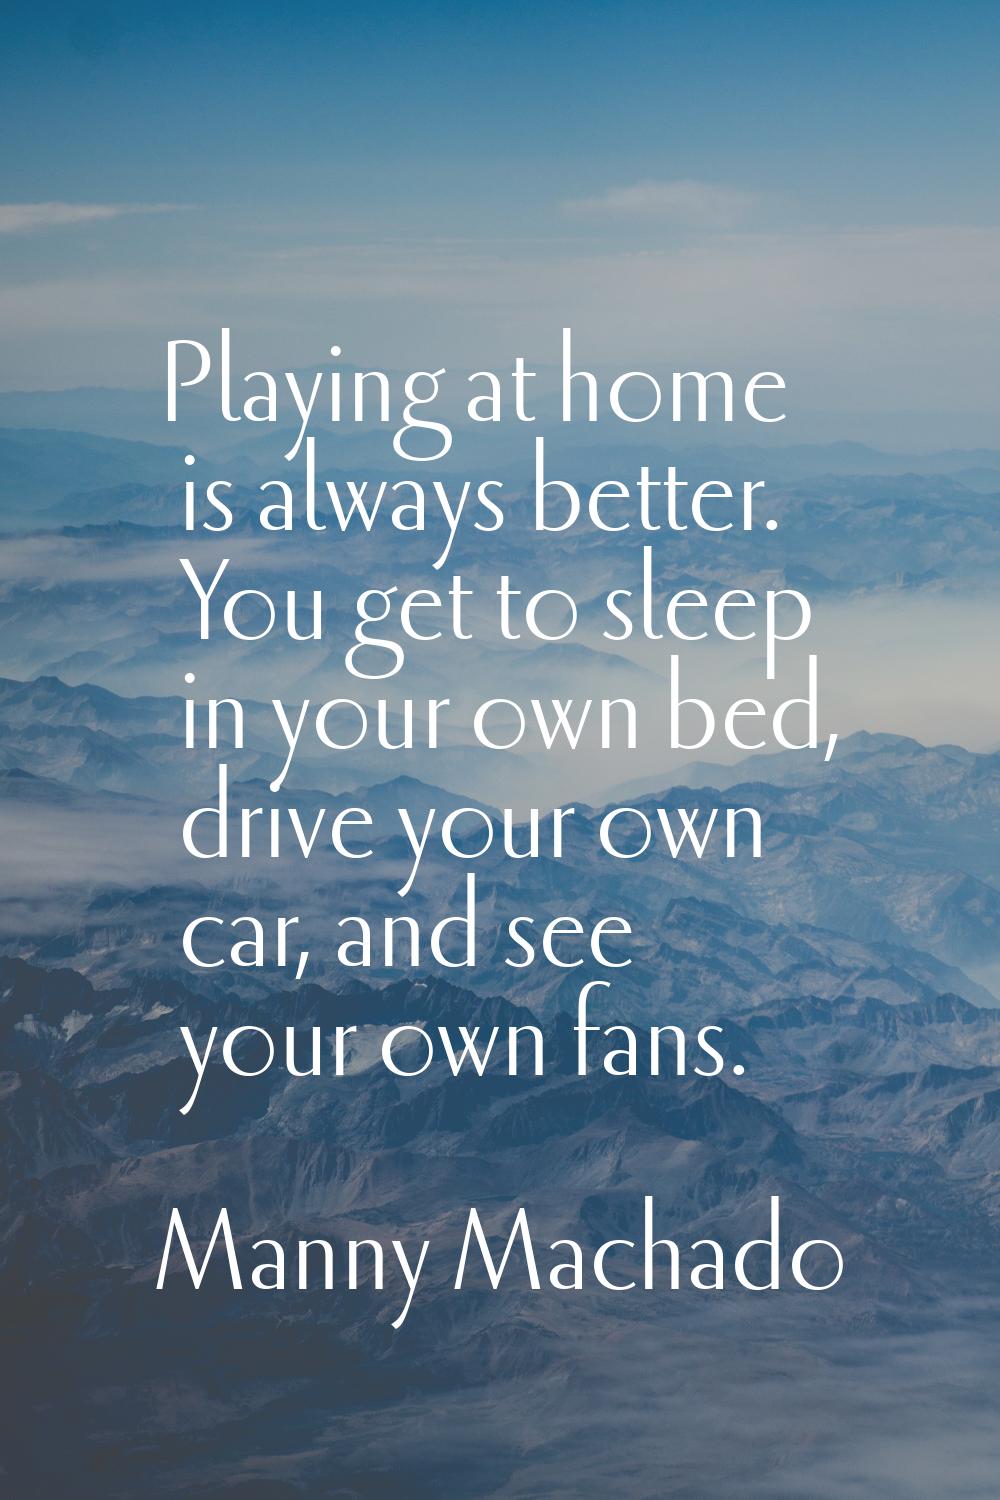 Playing at home is always better. You get to sleep in your own bed, drive your own car, and see you